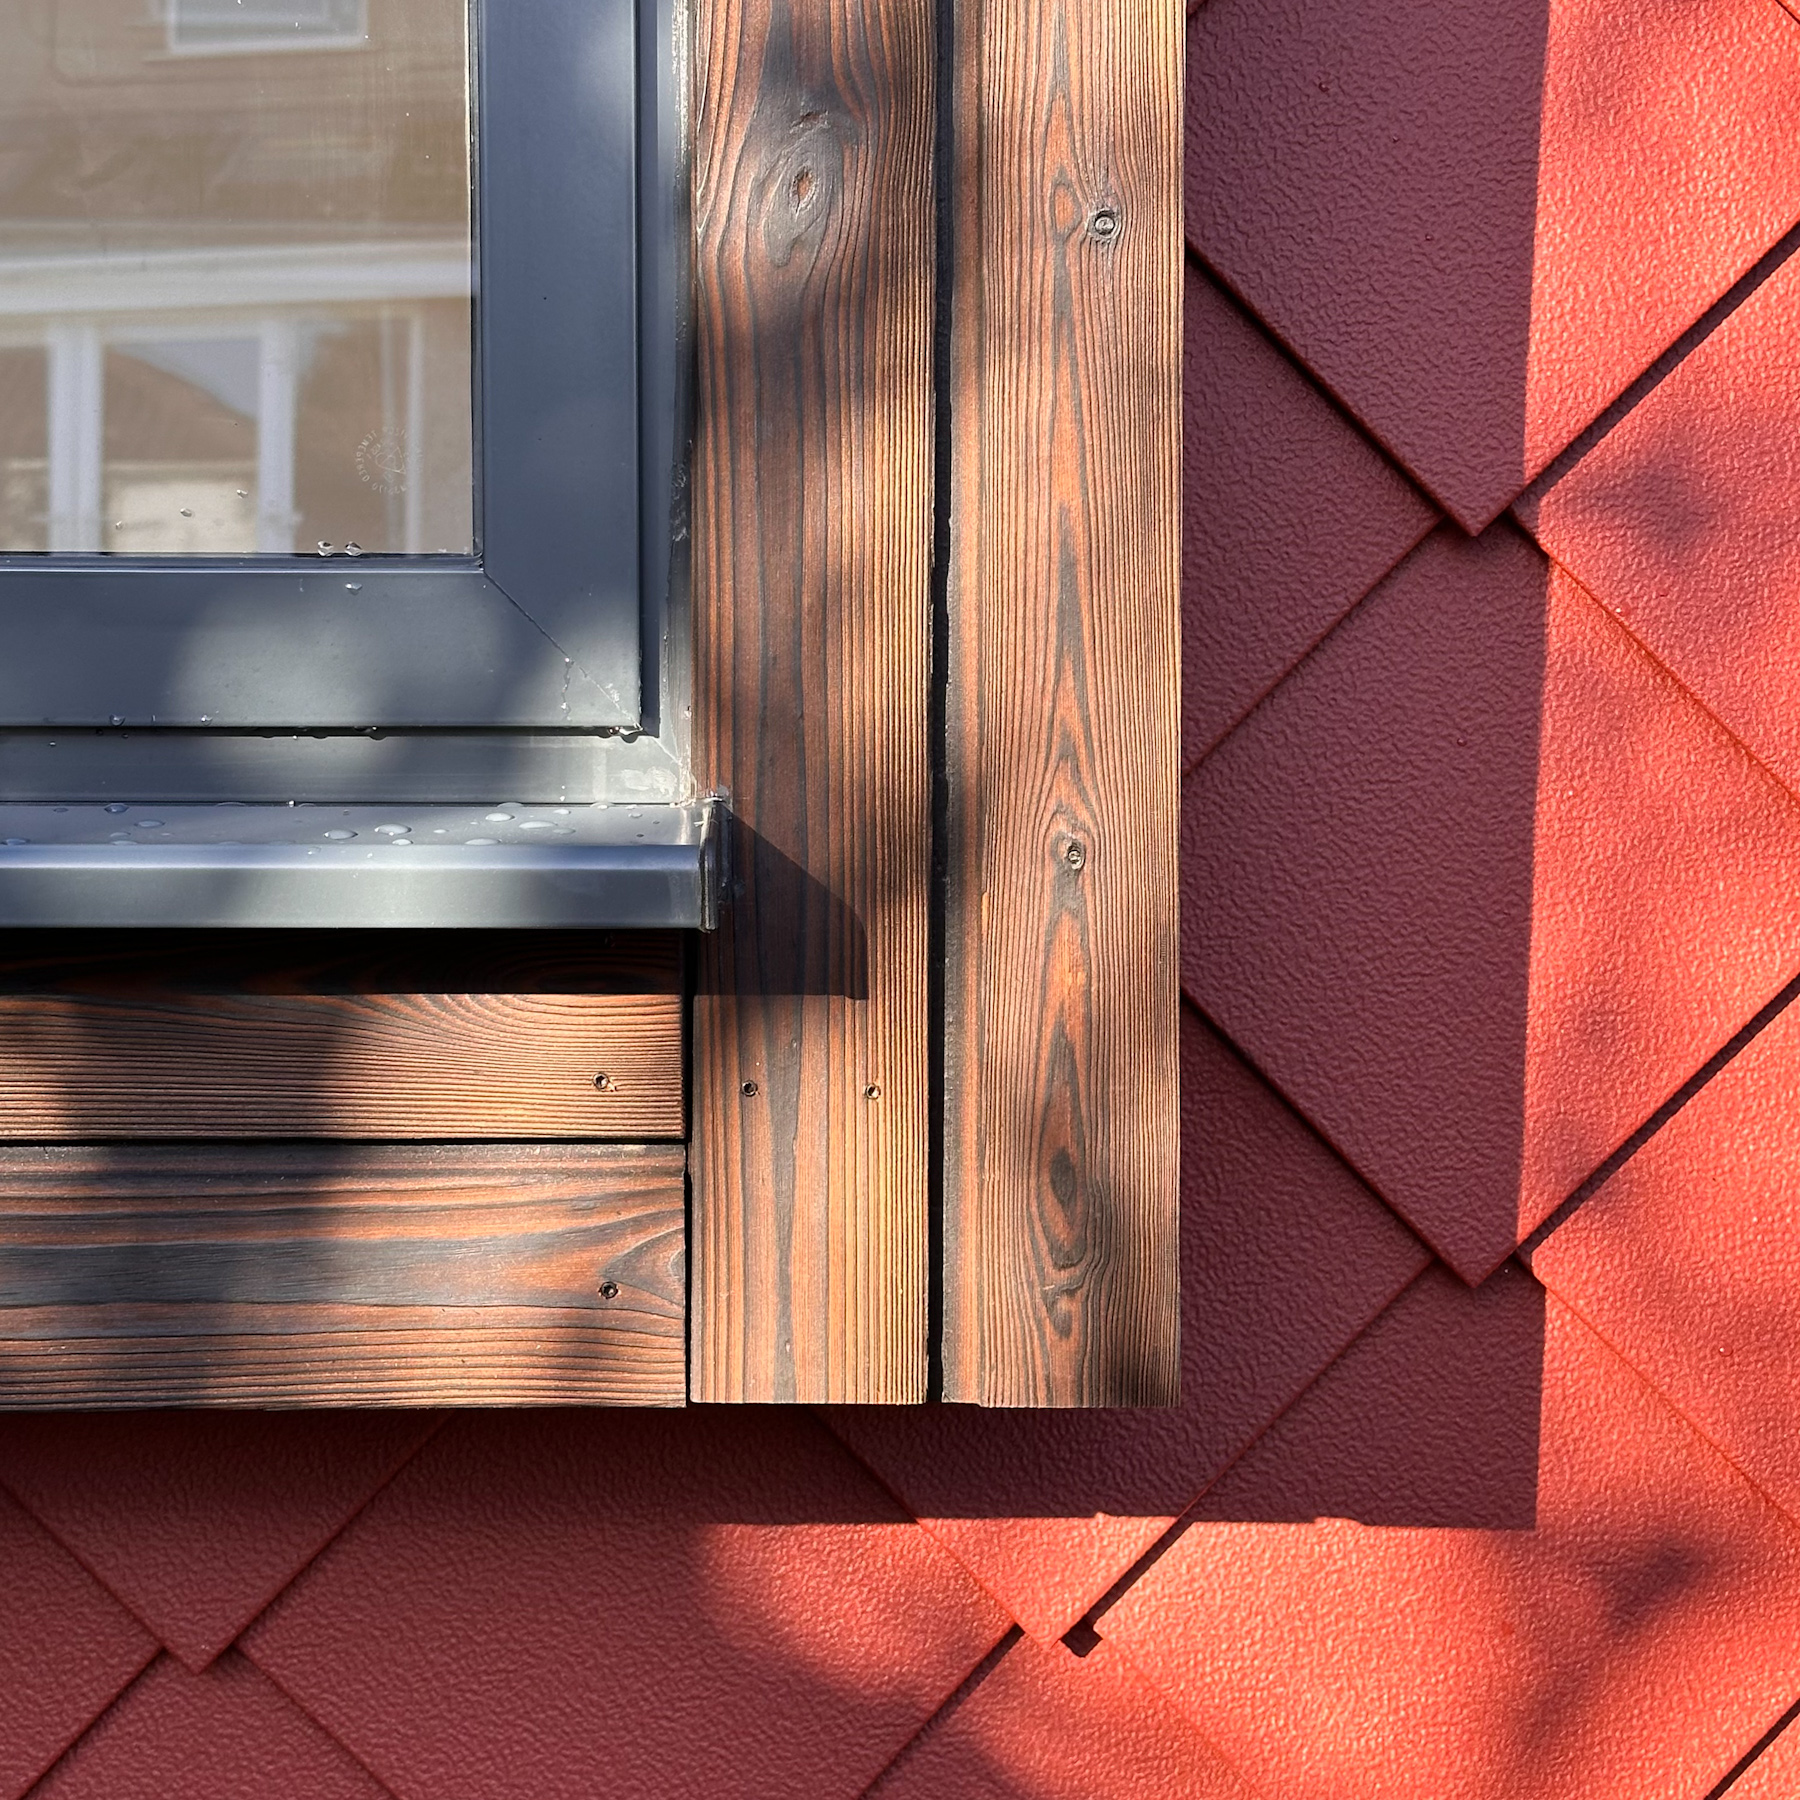 Mixing timber and metal coloured cladding on a cabin